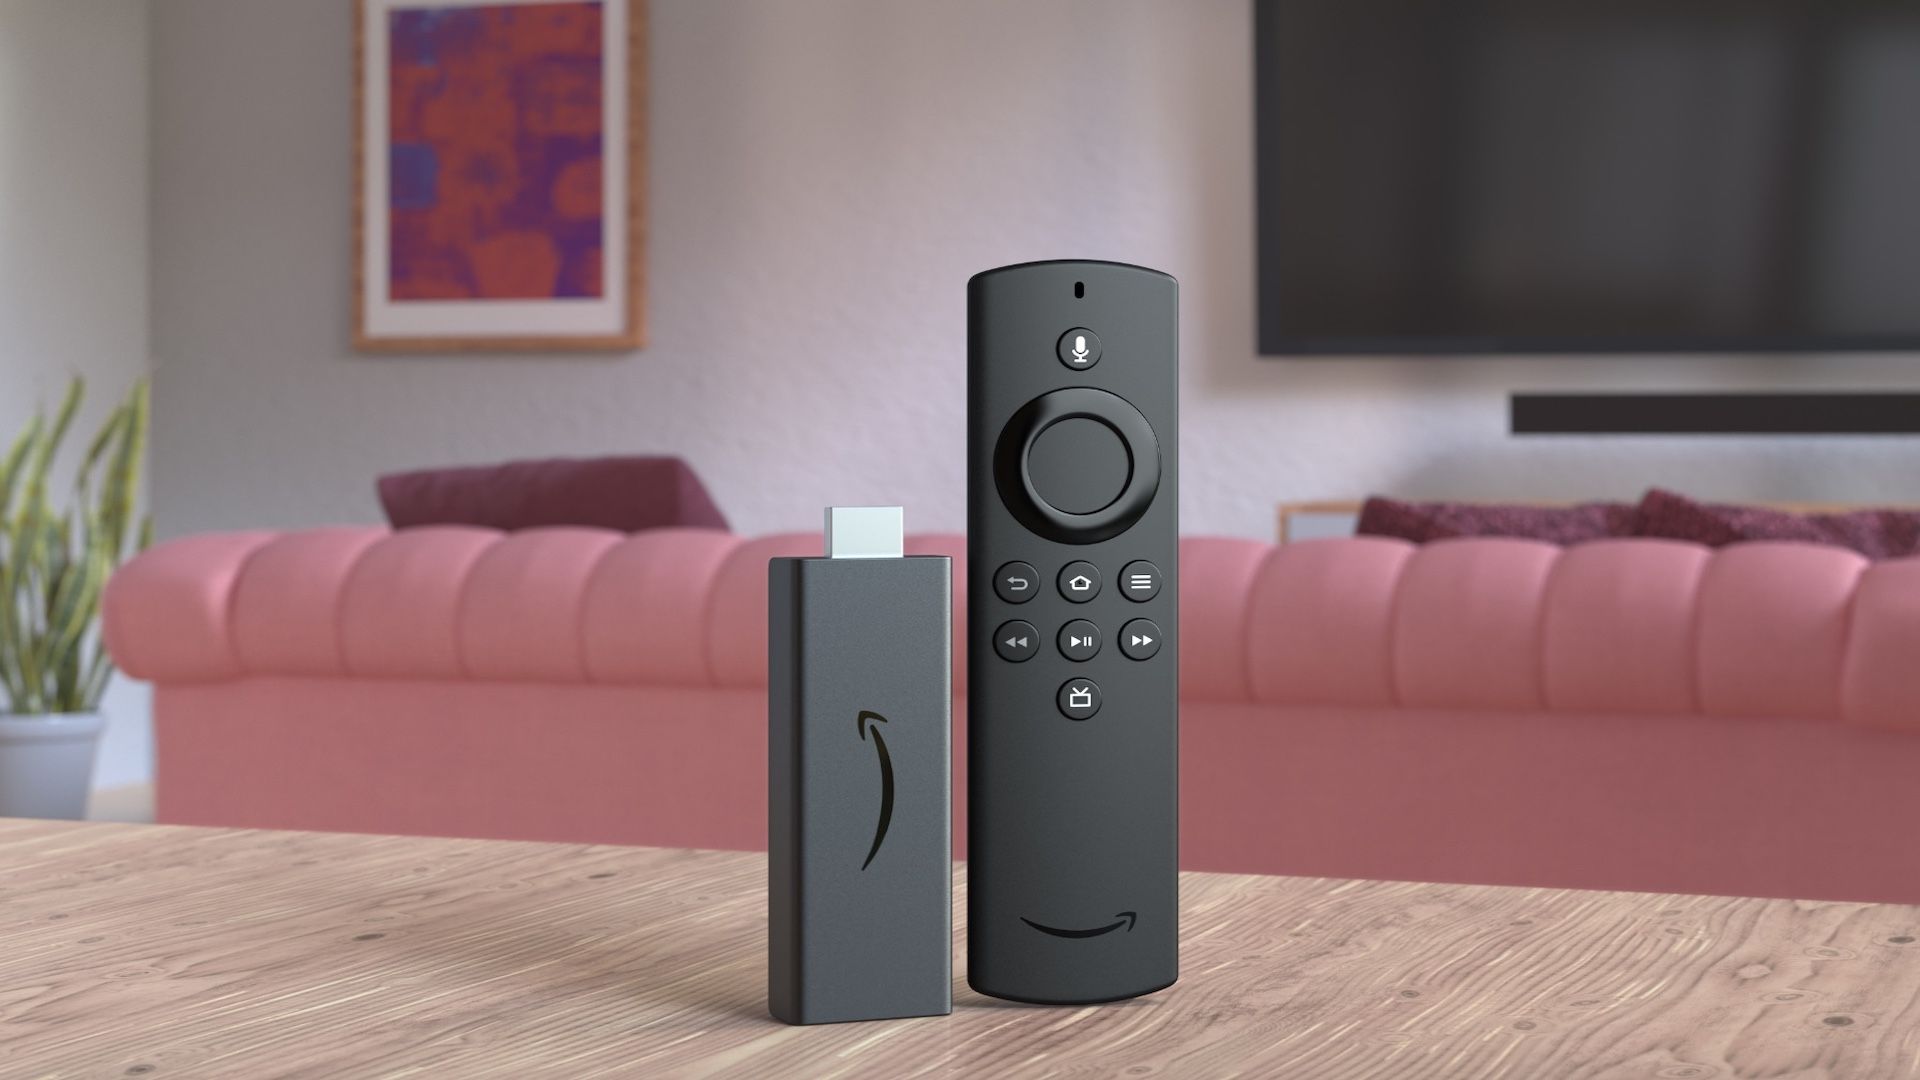 Amazon Fire TV Stick with remote on a table hero image